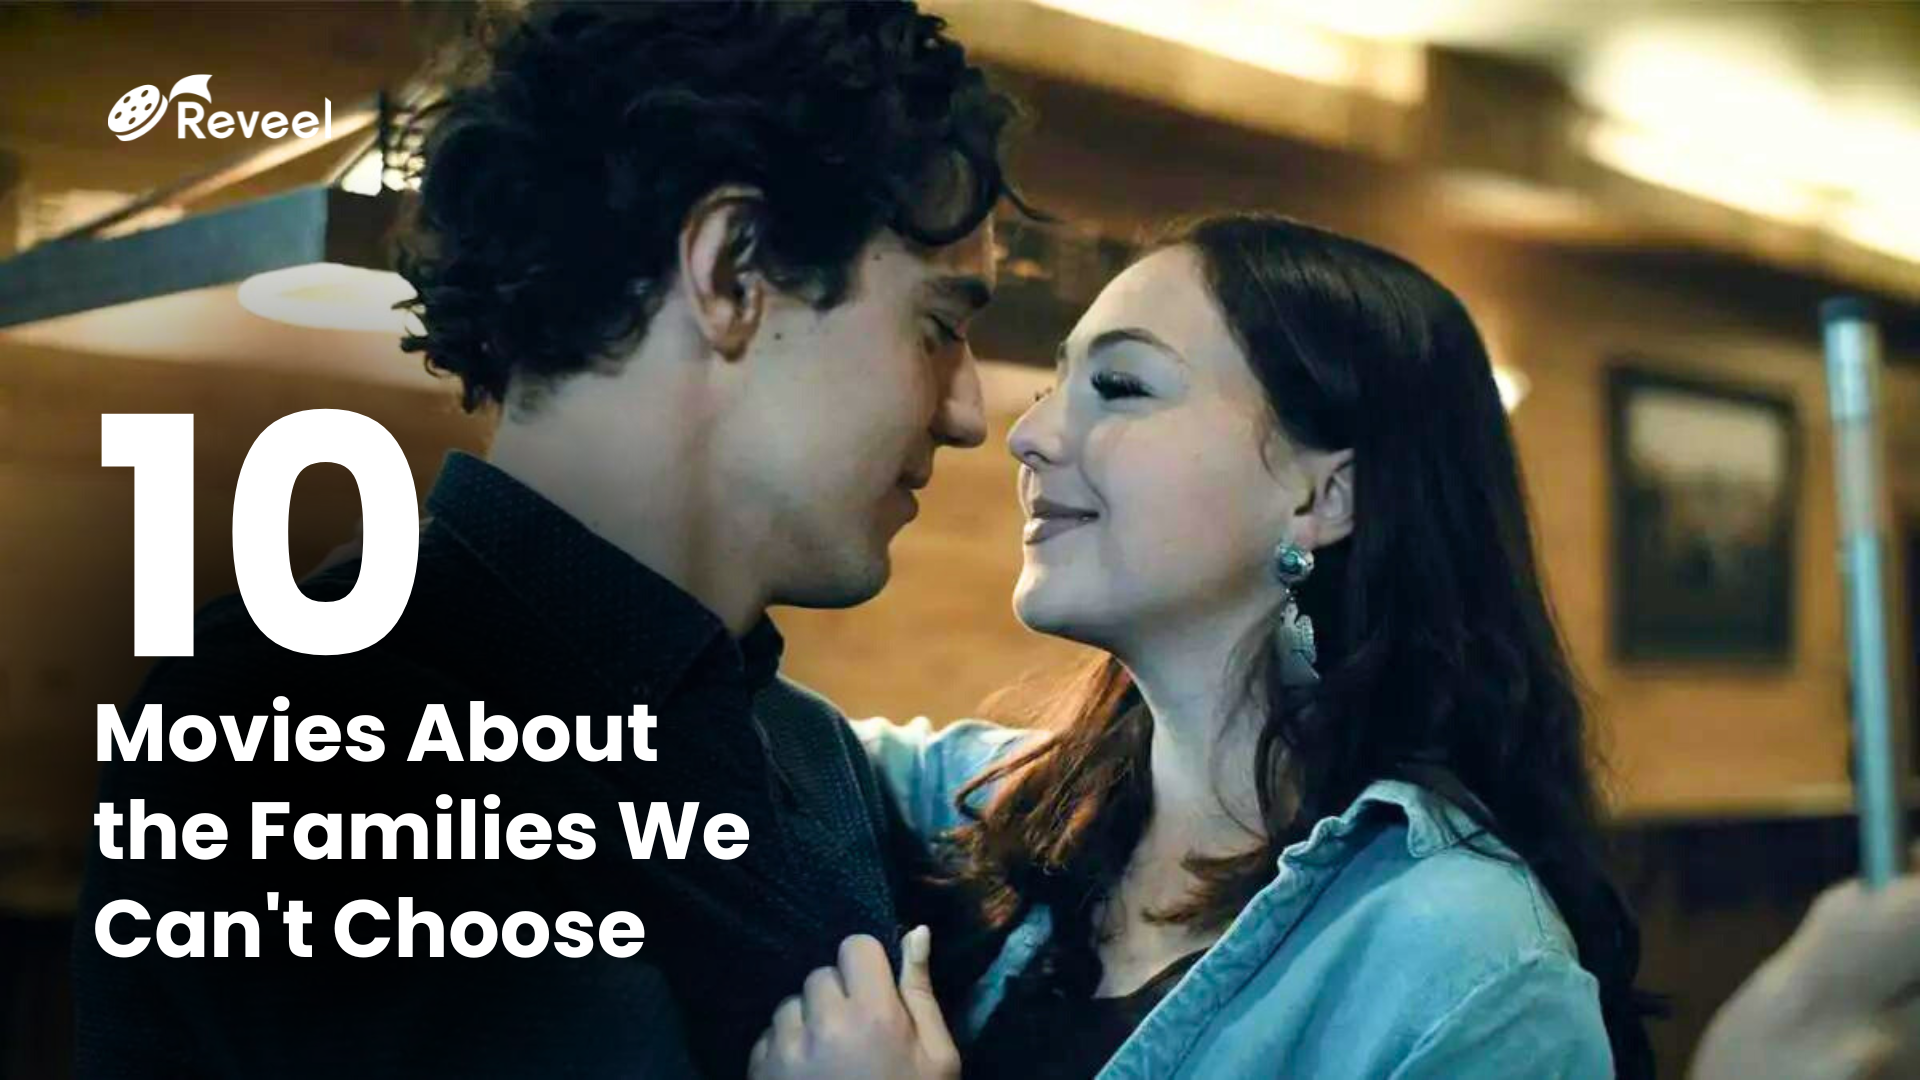 10 Movies About the Families We Can't Choose